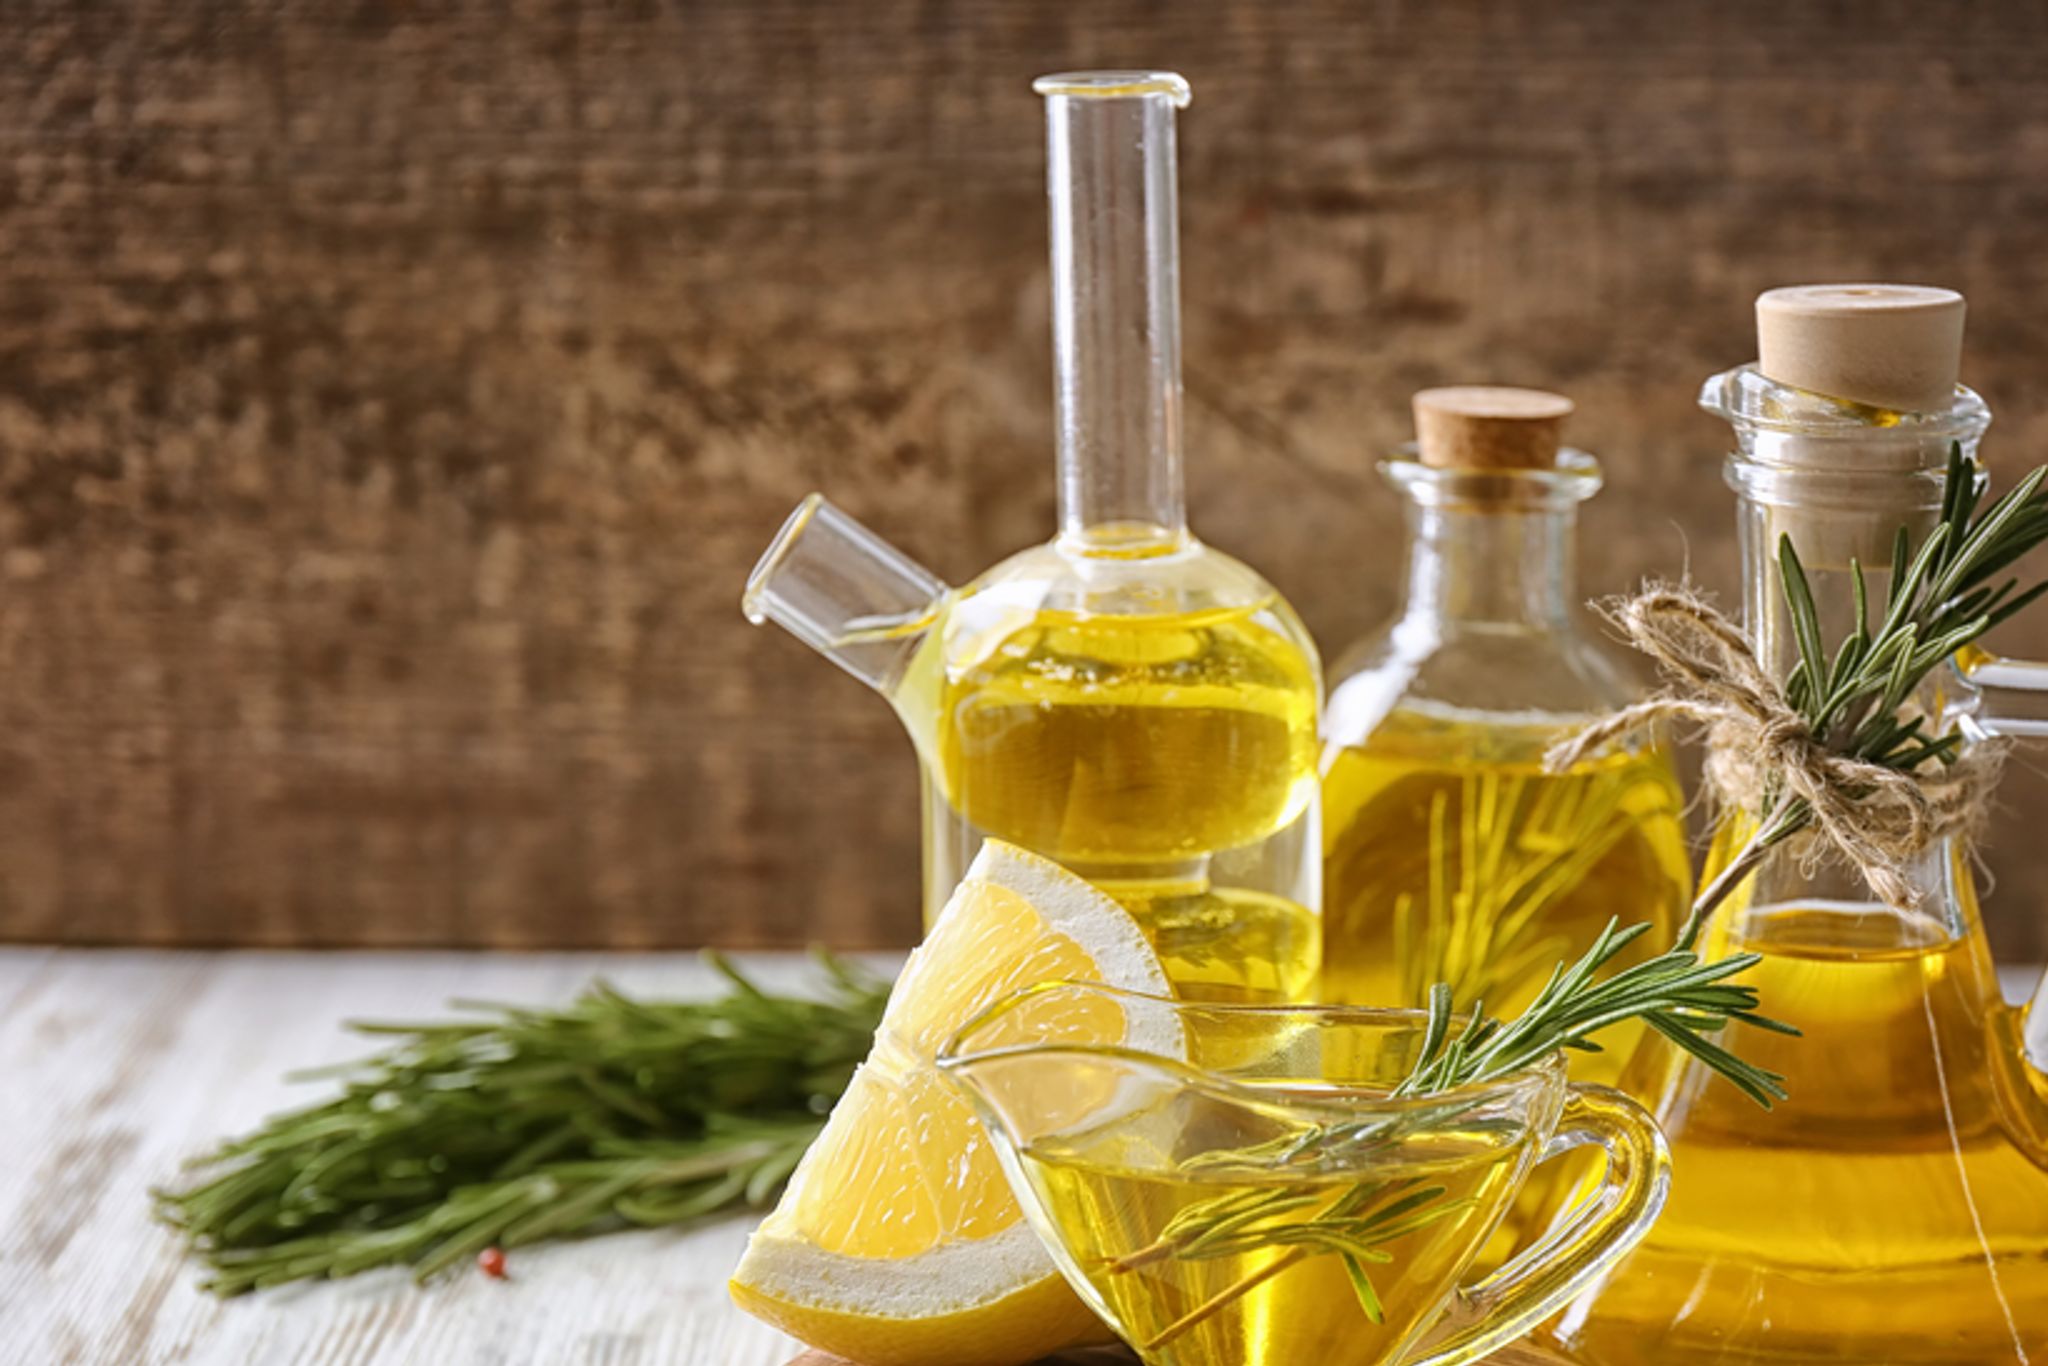 How To Use Rosemary Extract As A Preservative